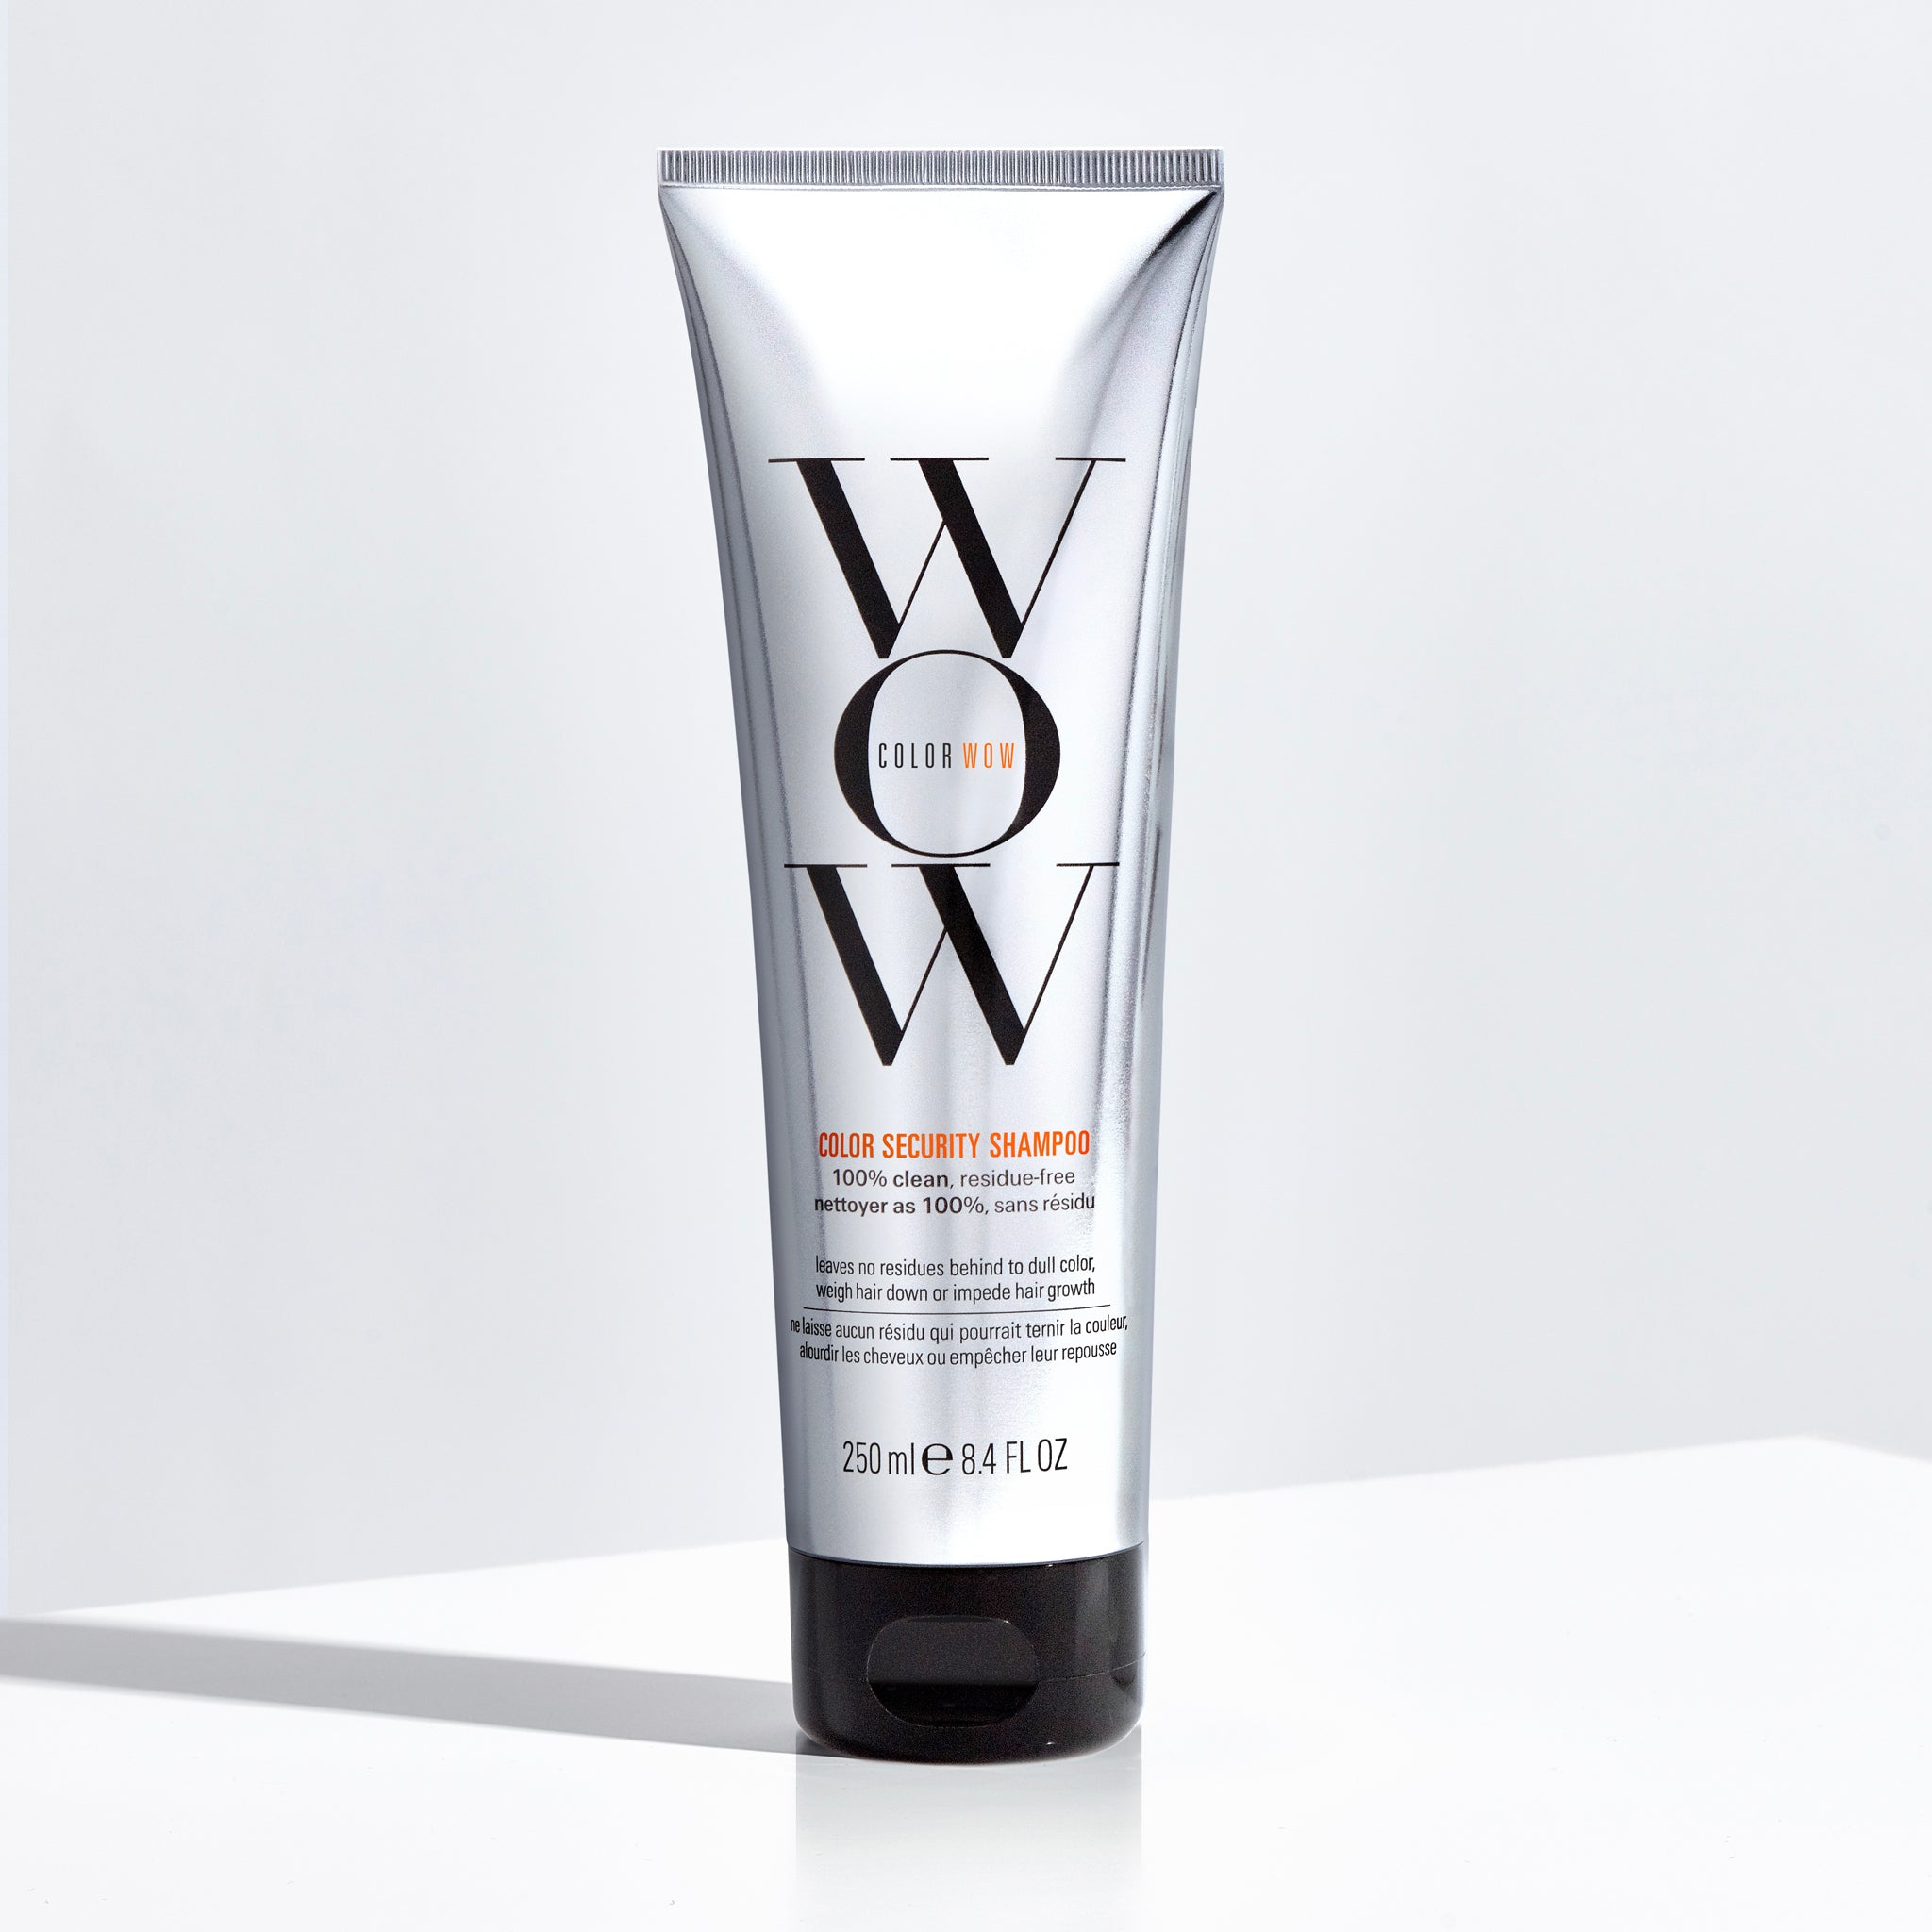 COLOR WOW Color Security Shampoo and Conditioner Duo Set - Hydrating  Formula for Fine to Normal Hair